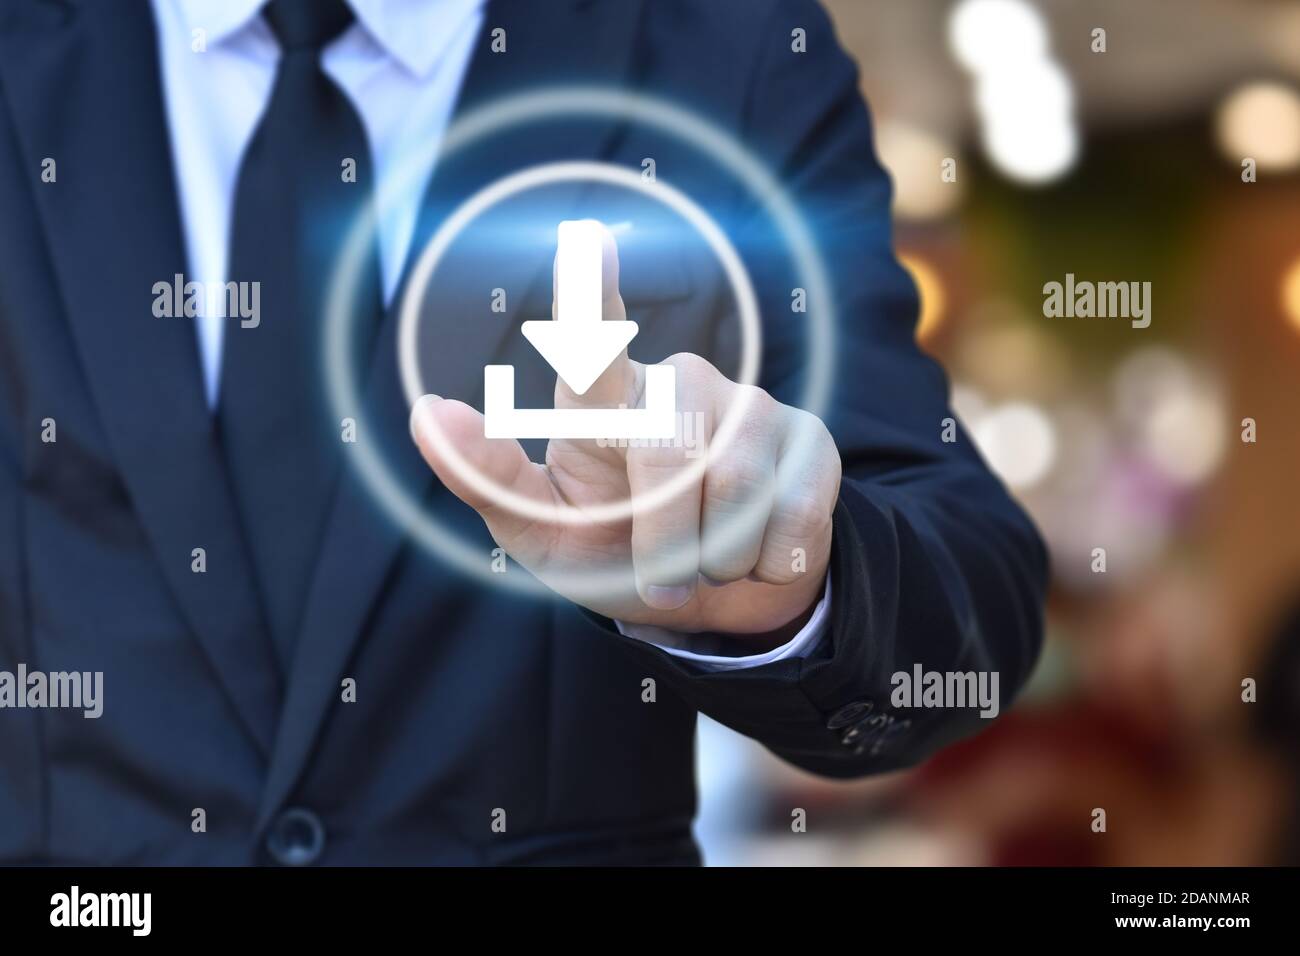 Businessman hand pushing web download icon on virtual touchscreen interface. Stock Photo